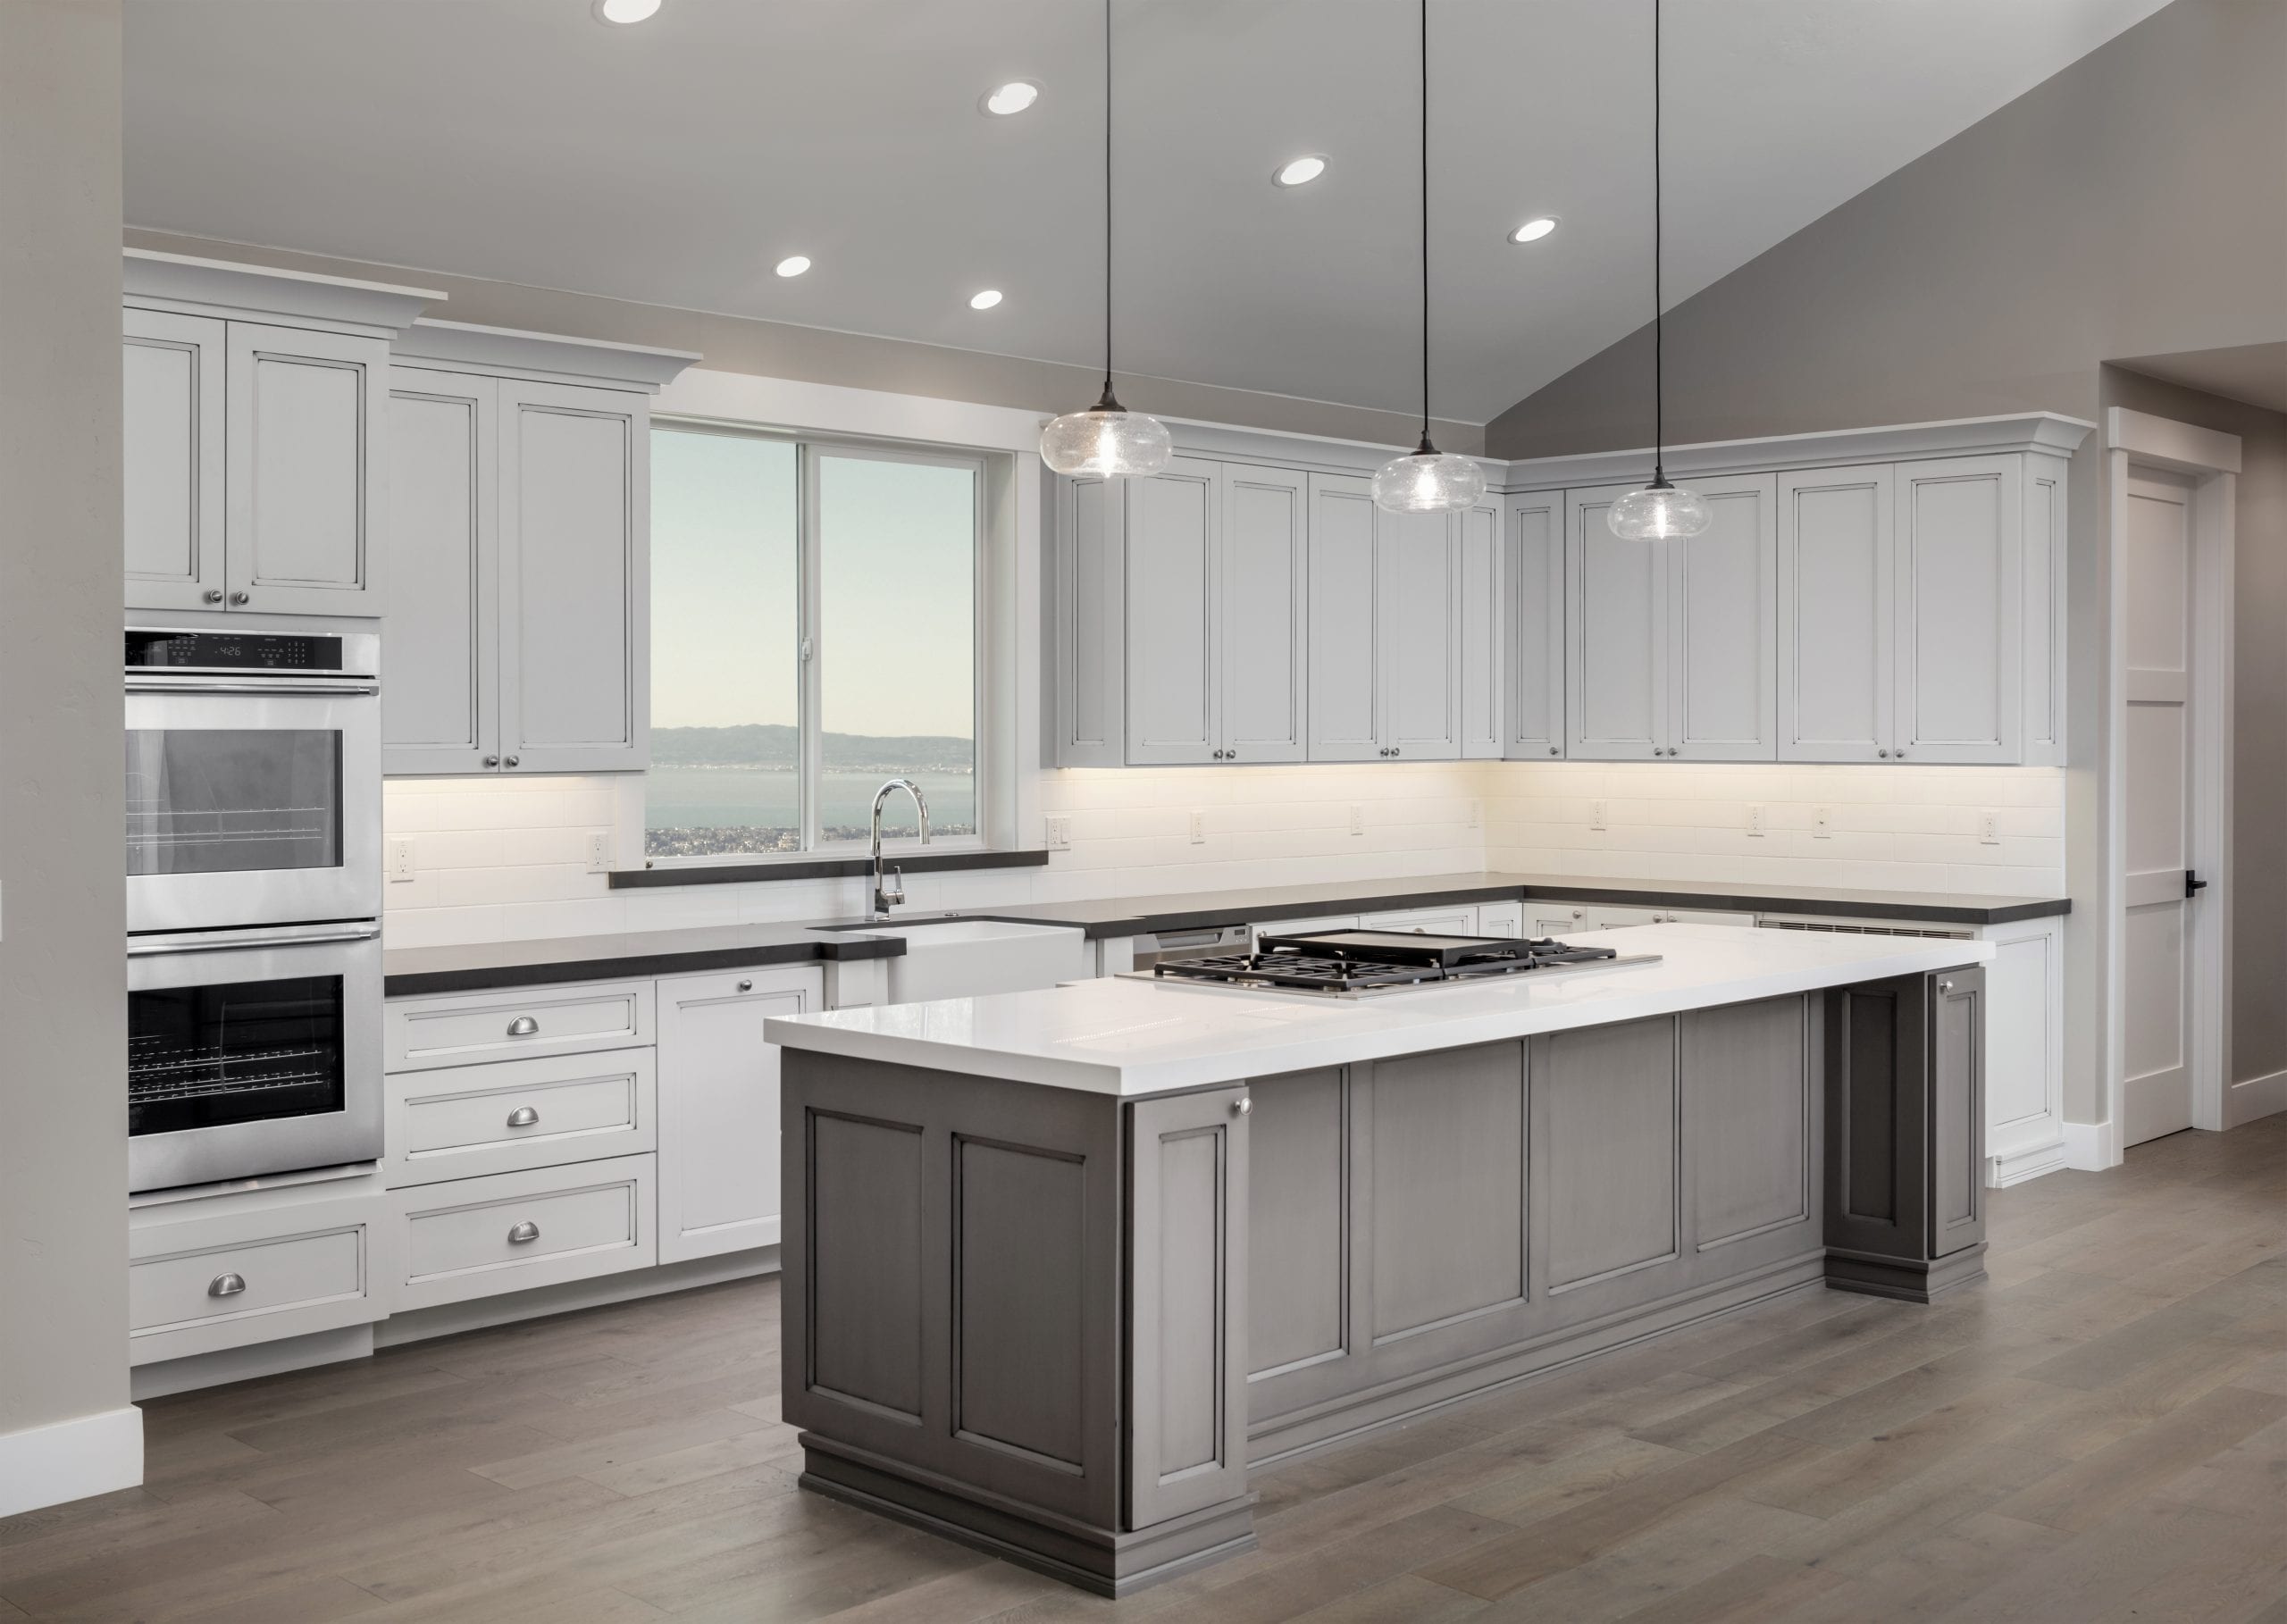 A newly renovated, modern kitchen with high-quality finishings, designed by Praiano Home Improvement.